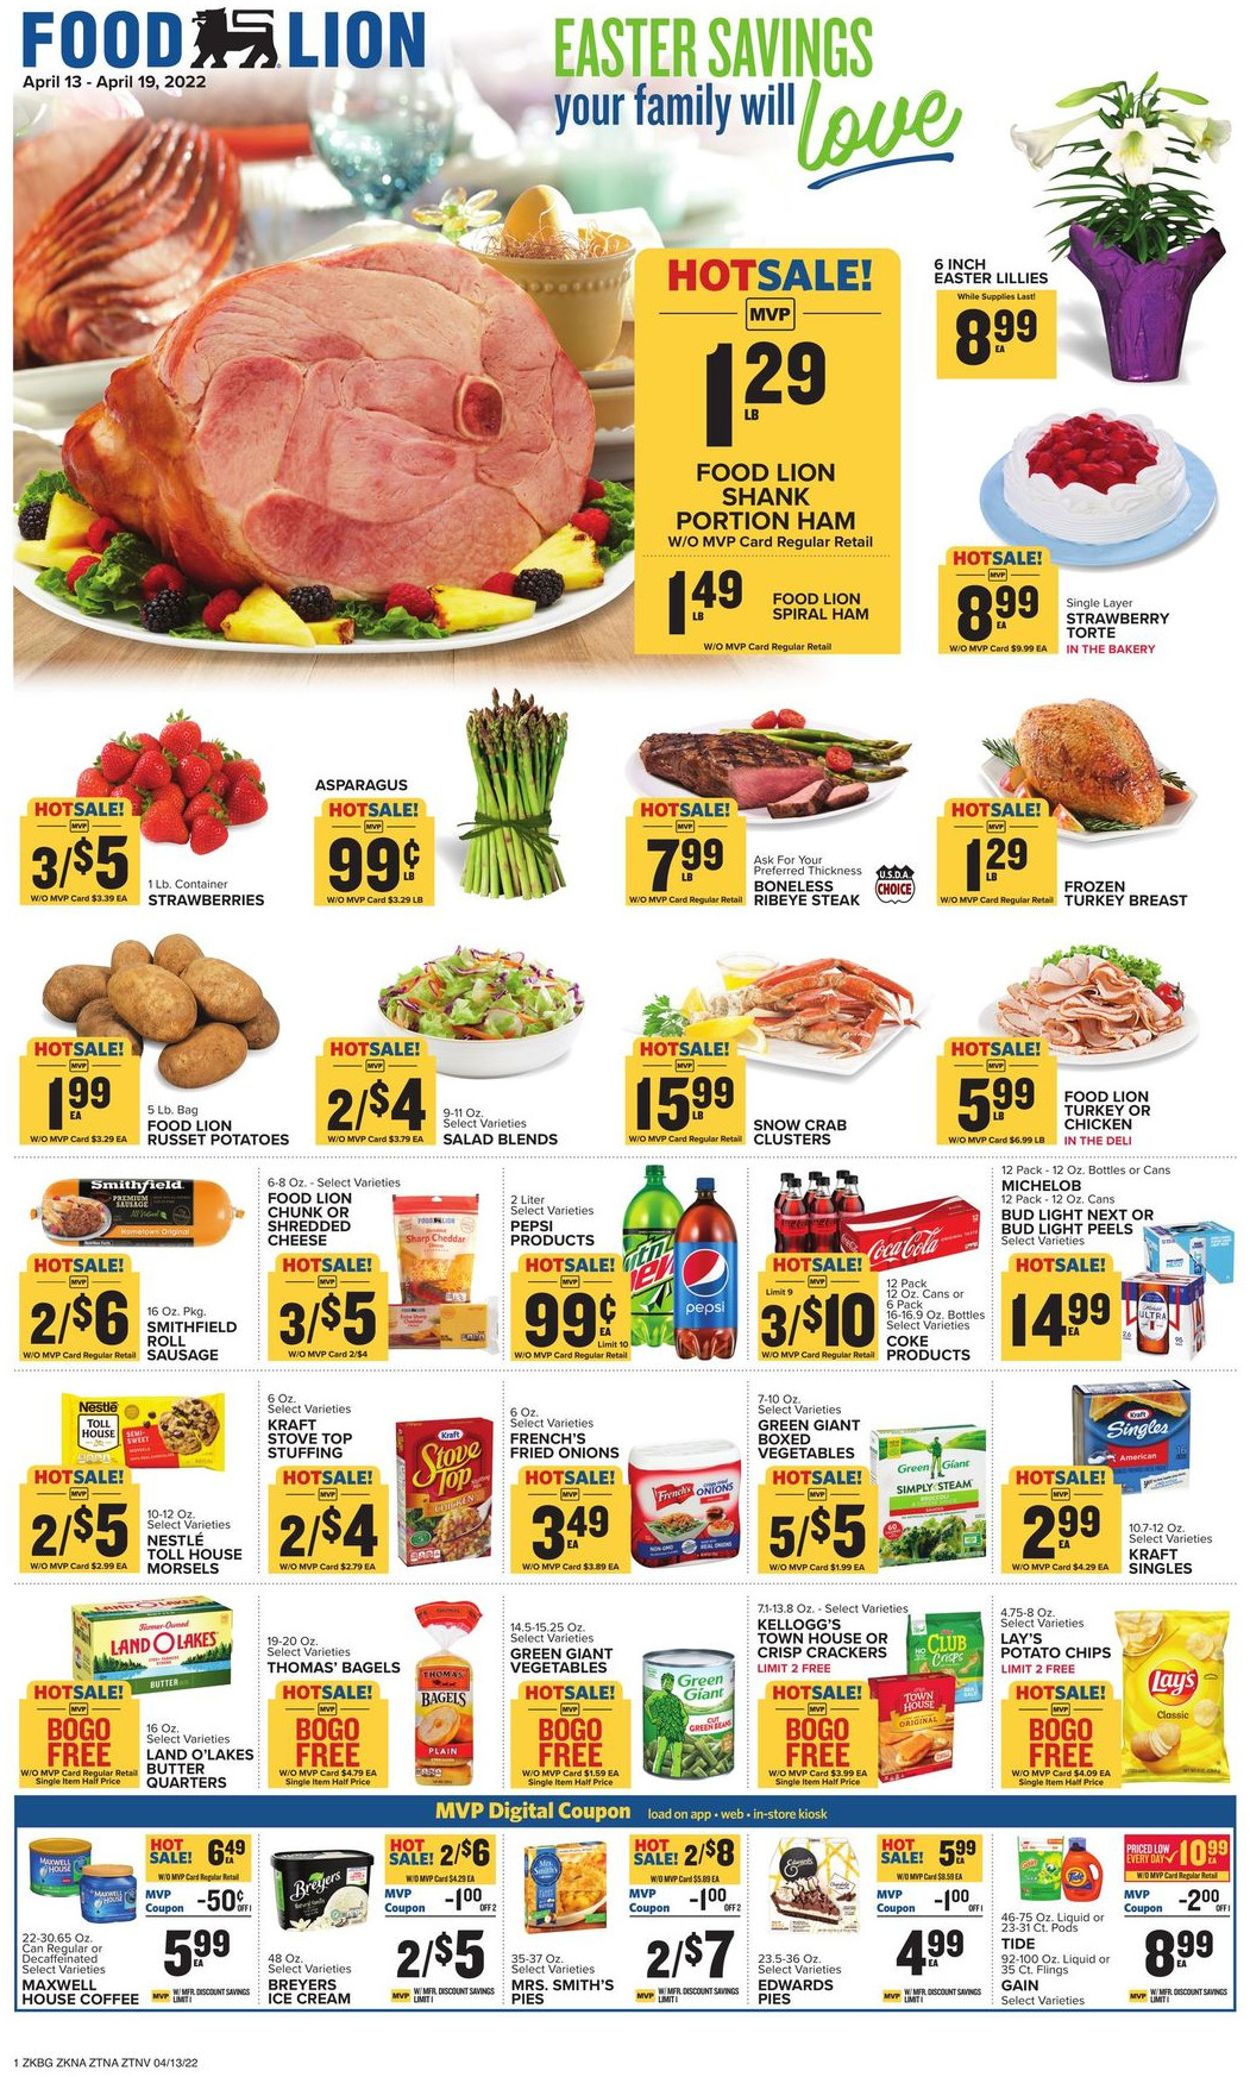 Food Lion EASTER 2022 Current weekly ad 04/13 04/19/2022